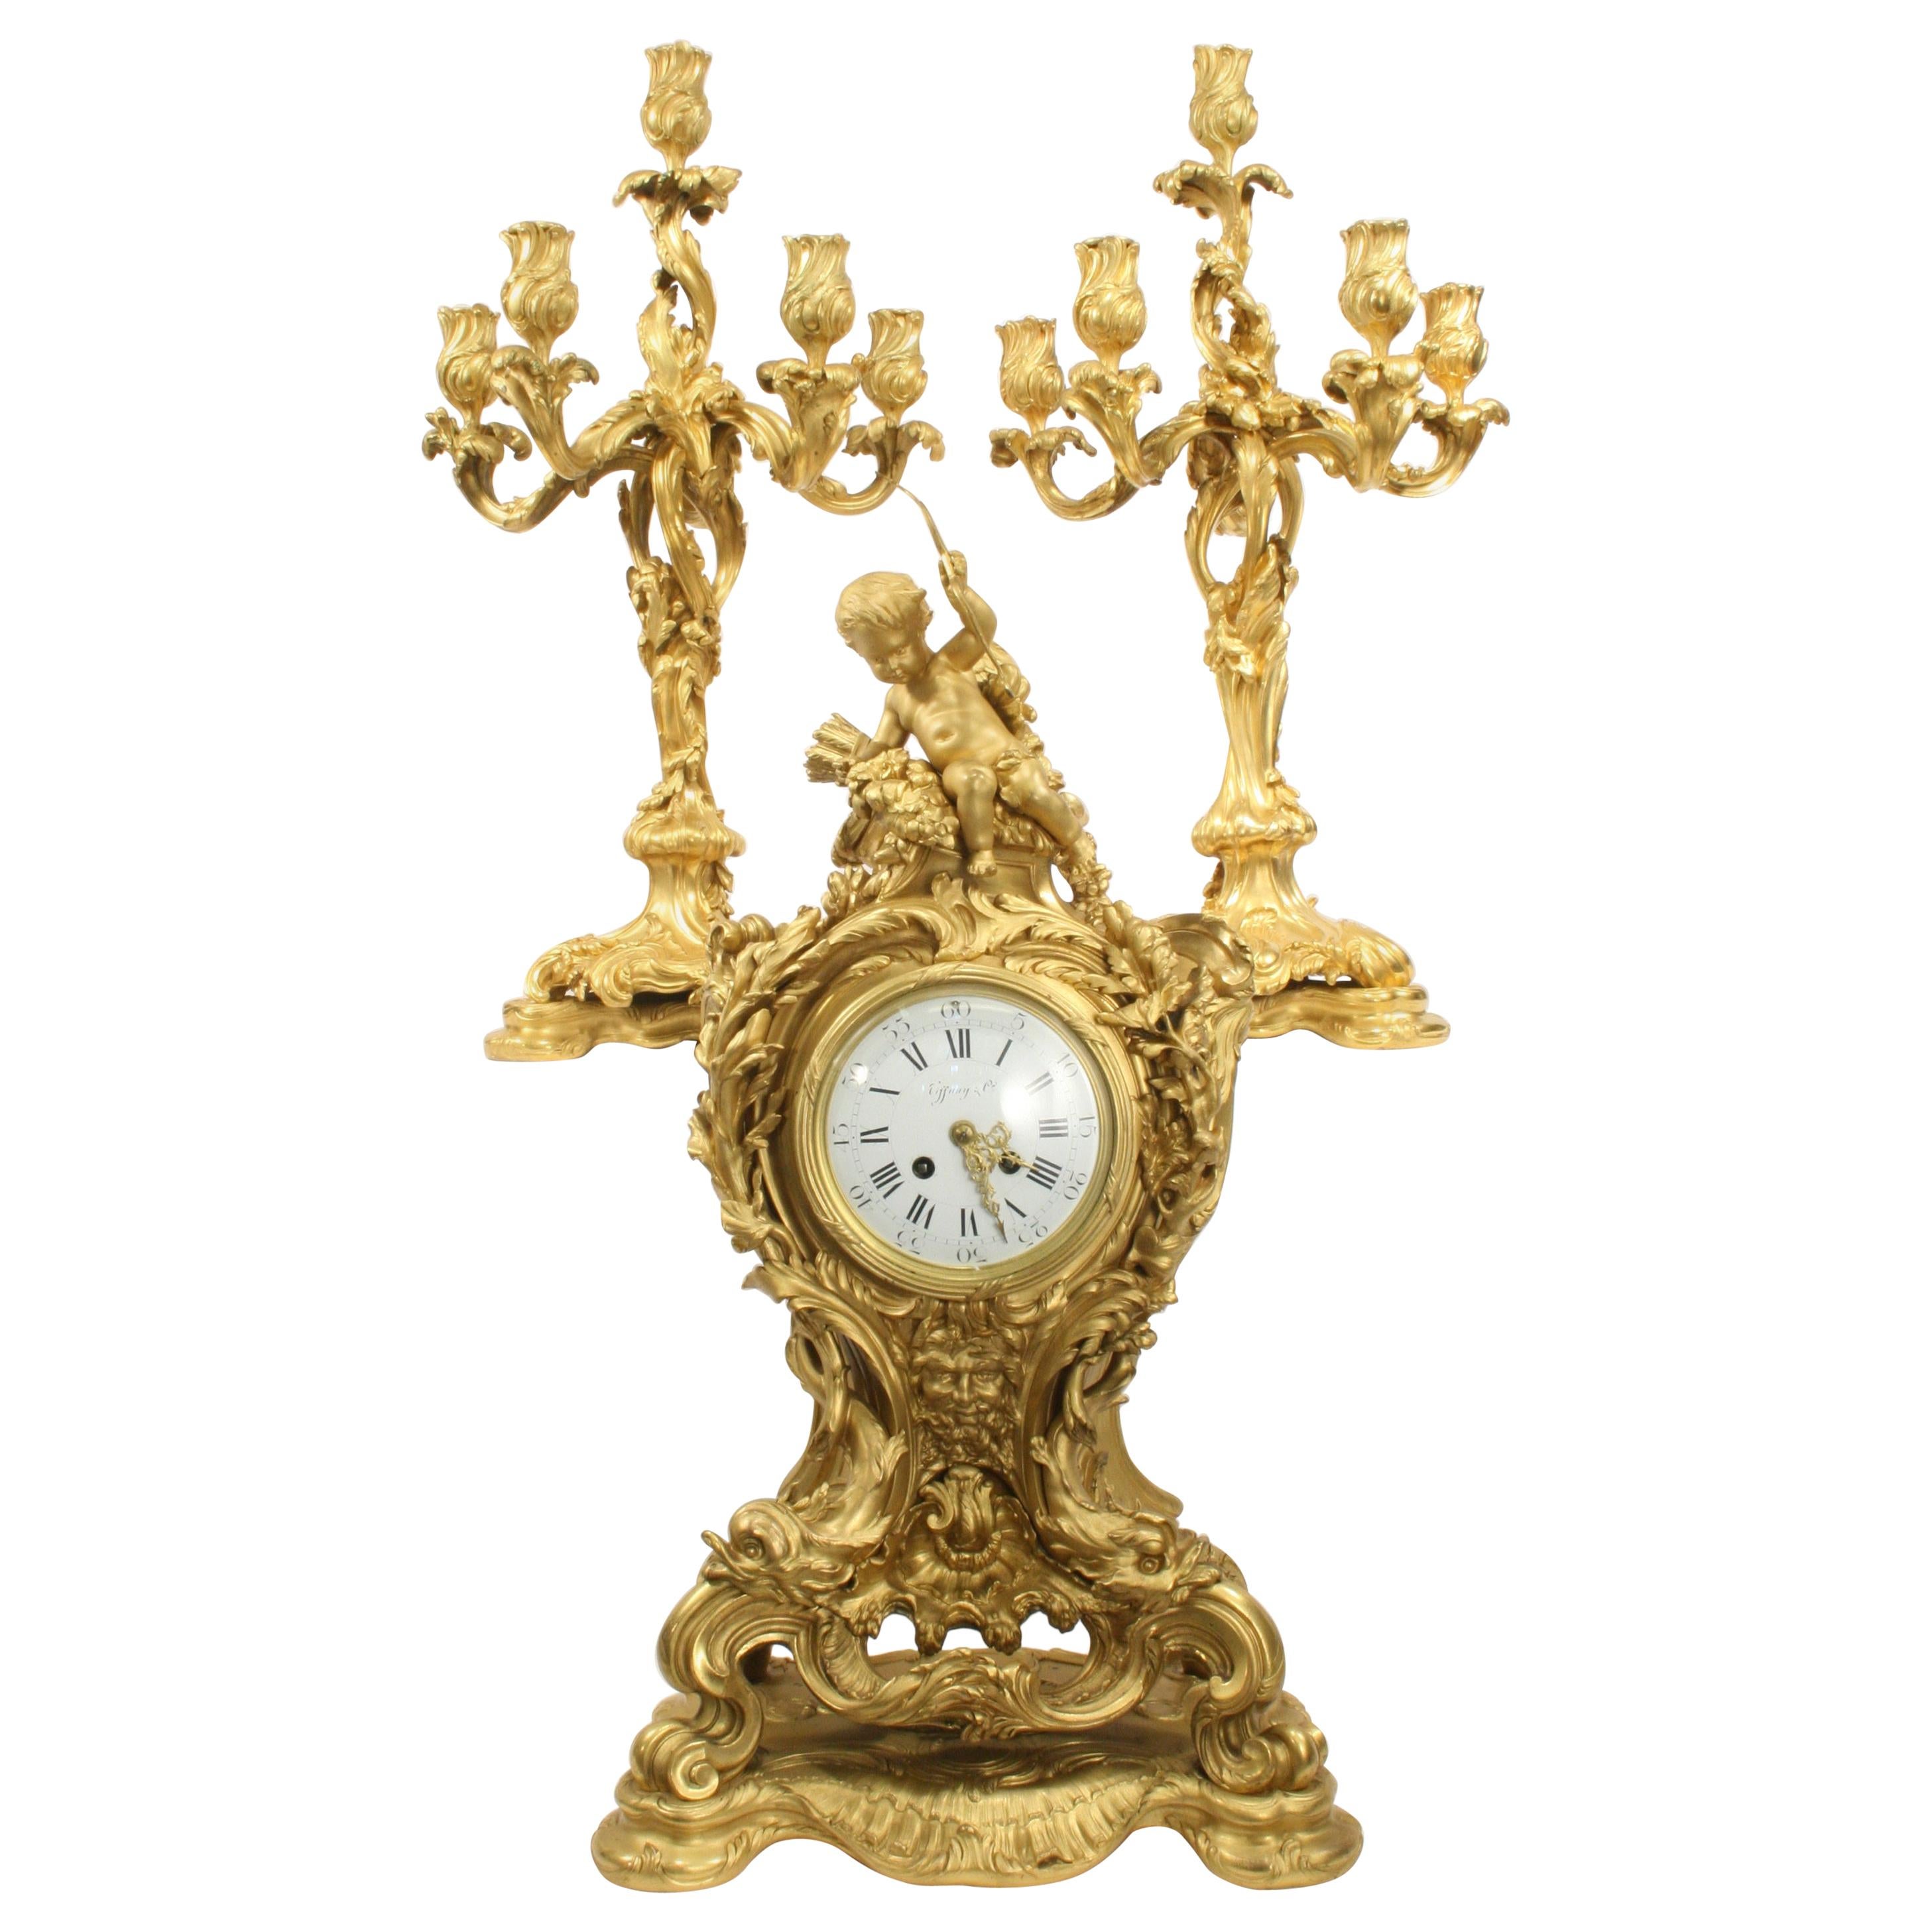 This impressive example of an early 20th century French Rococo palace size clock set comes from the prestigious E. Colin & Cie of Paris foundry. The sculpted ensemble is detailed with crisp elaborate scrolling accented with a full figure cupid with